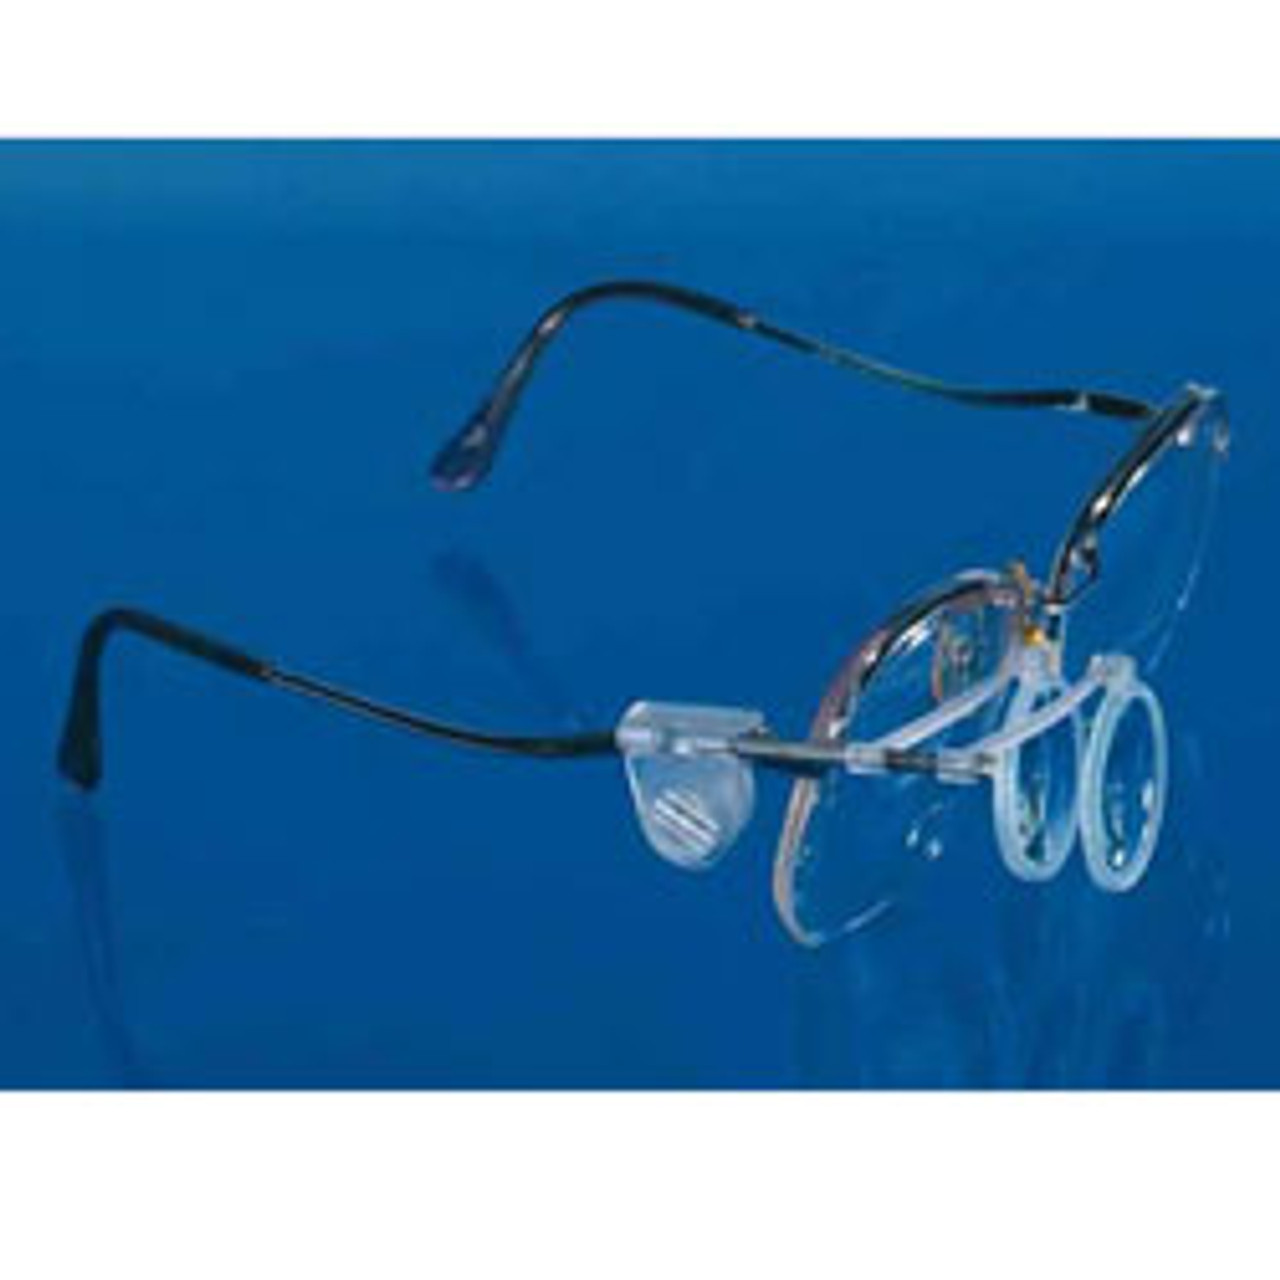 Jewellers Eye Glasses and Magnifiers